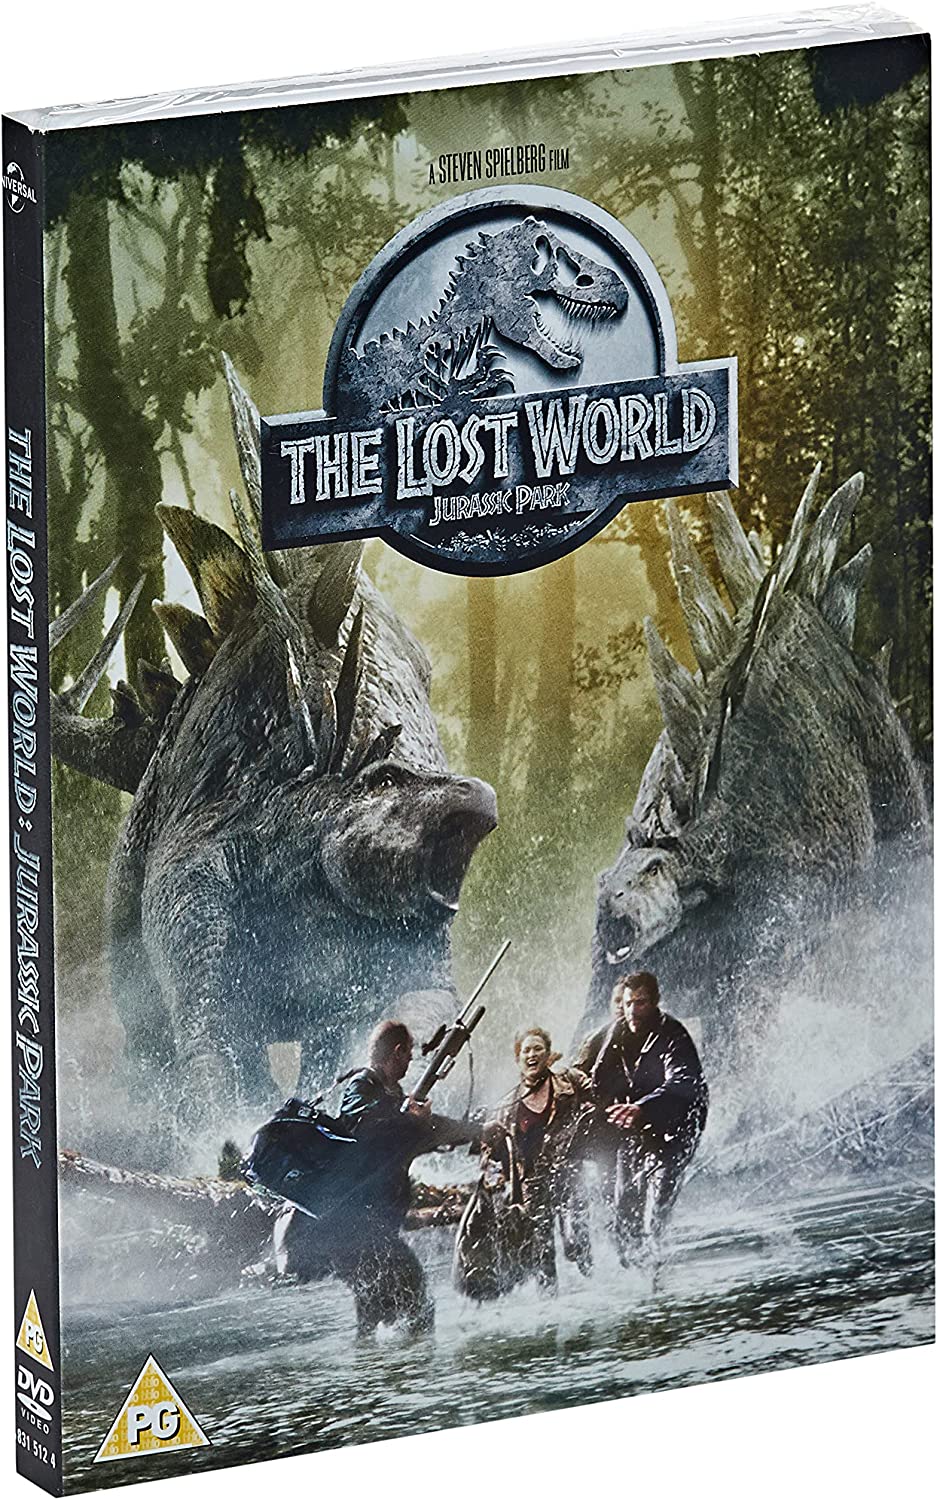 Jurassic Park: The Lost World [2018] - Action/Sci-fi [DVD]